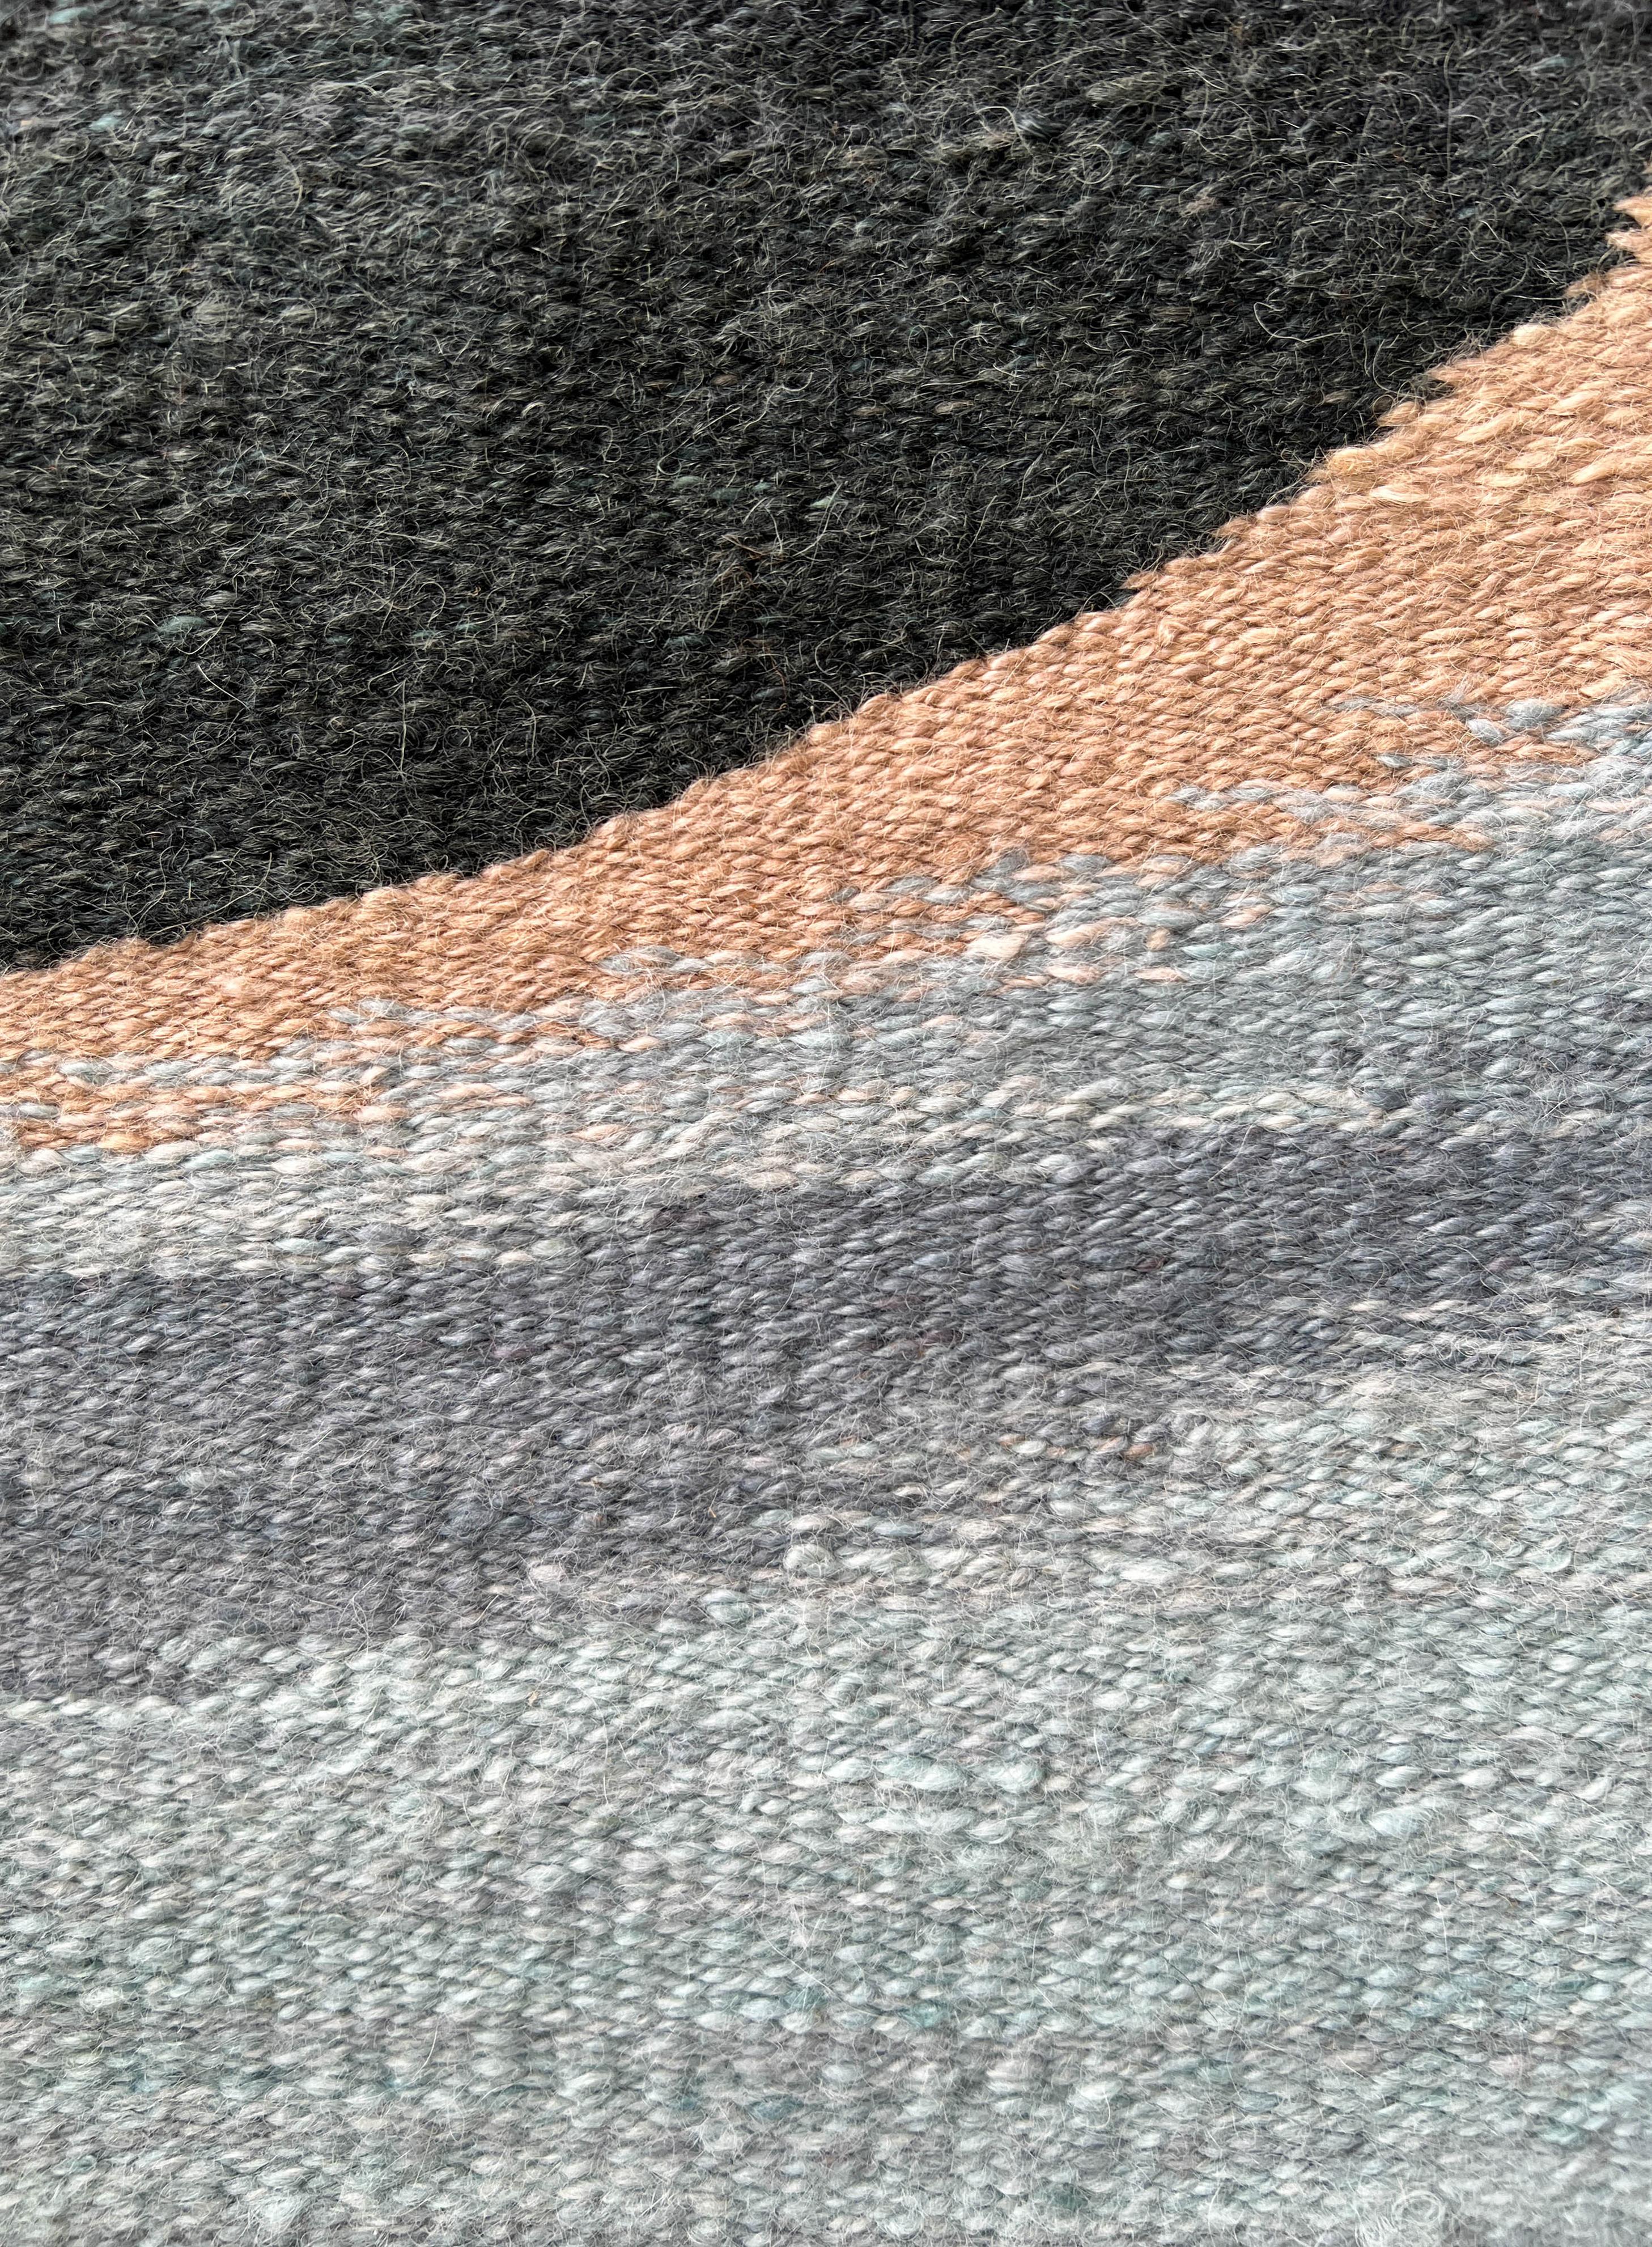 Adapted from the original artwork by Magdalena Jitrik, Vivienda, 2014.

Limited edition of 15 handmade and unique rugs.

LALANA RUGS is an applied arts initiative born from the desire to combine proposals by contemporary artists with traditional